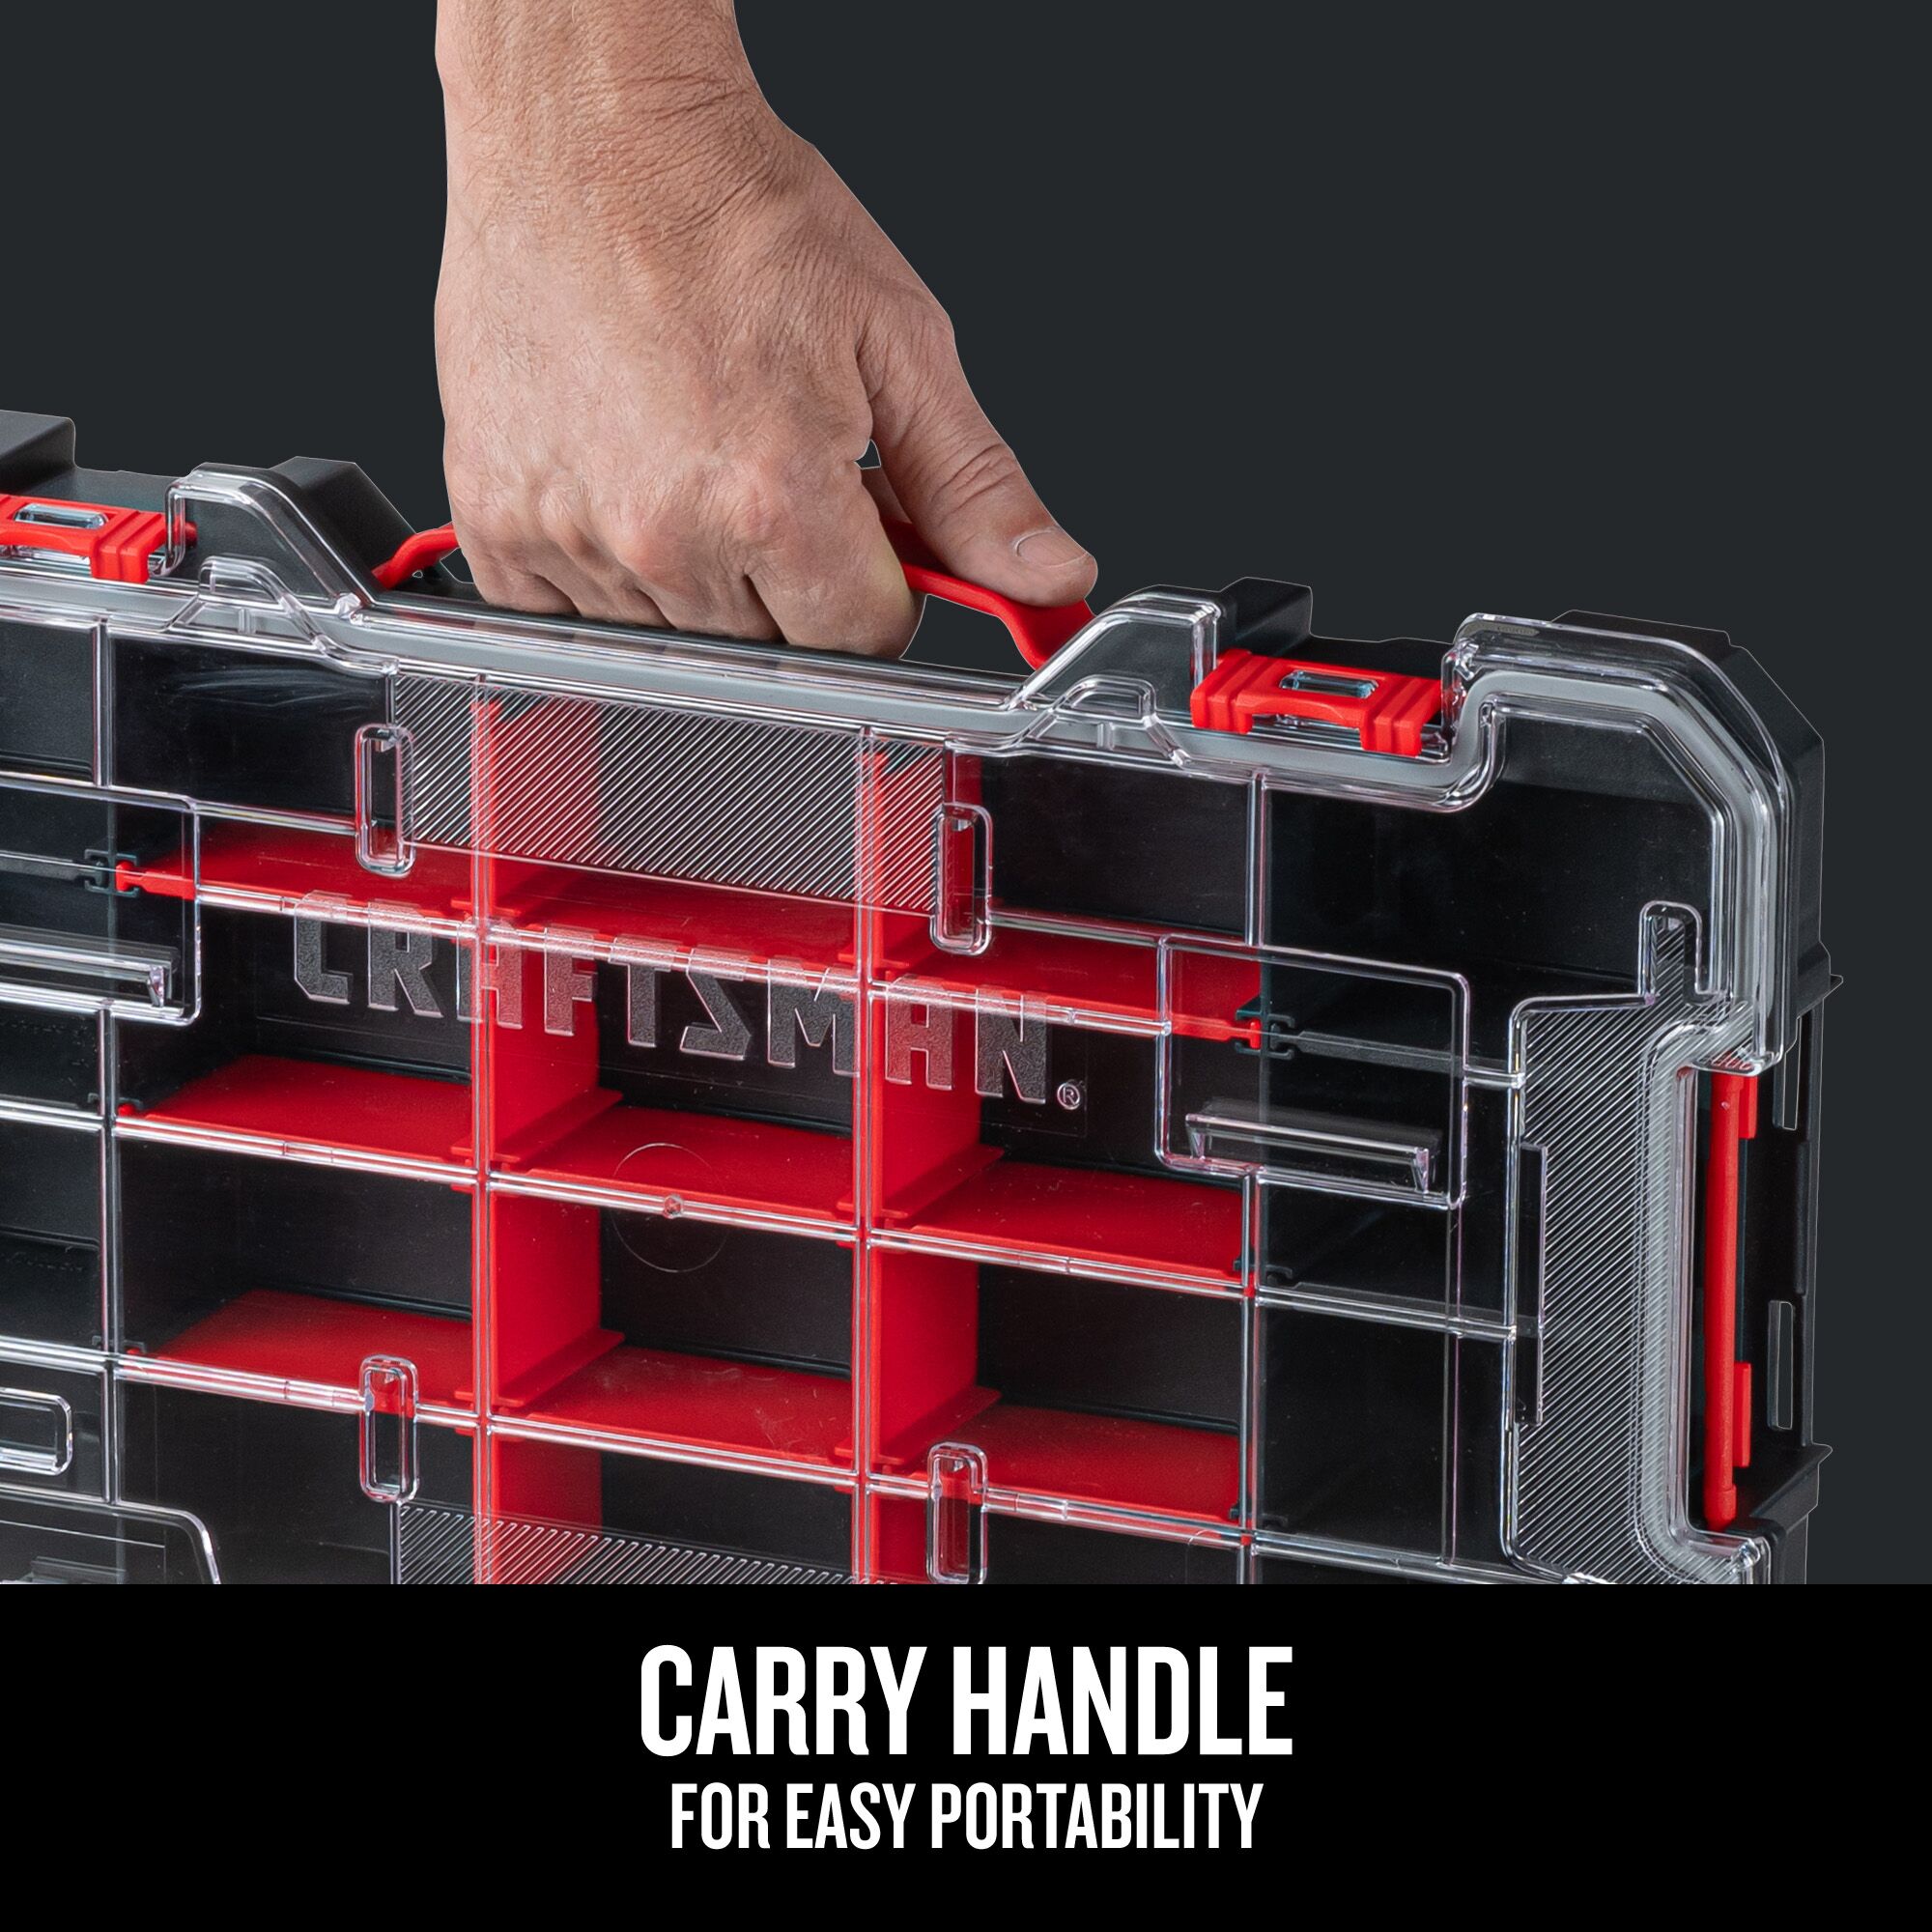 CRAFTSMAN Bin System 39-Compartment Plastic Small Parts Organizer in the  Small Parts Organizers department at